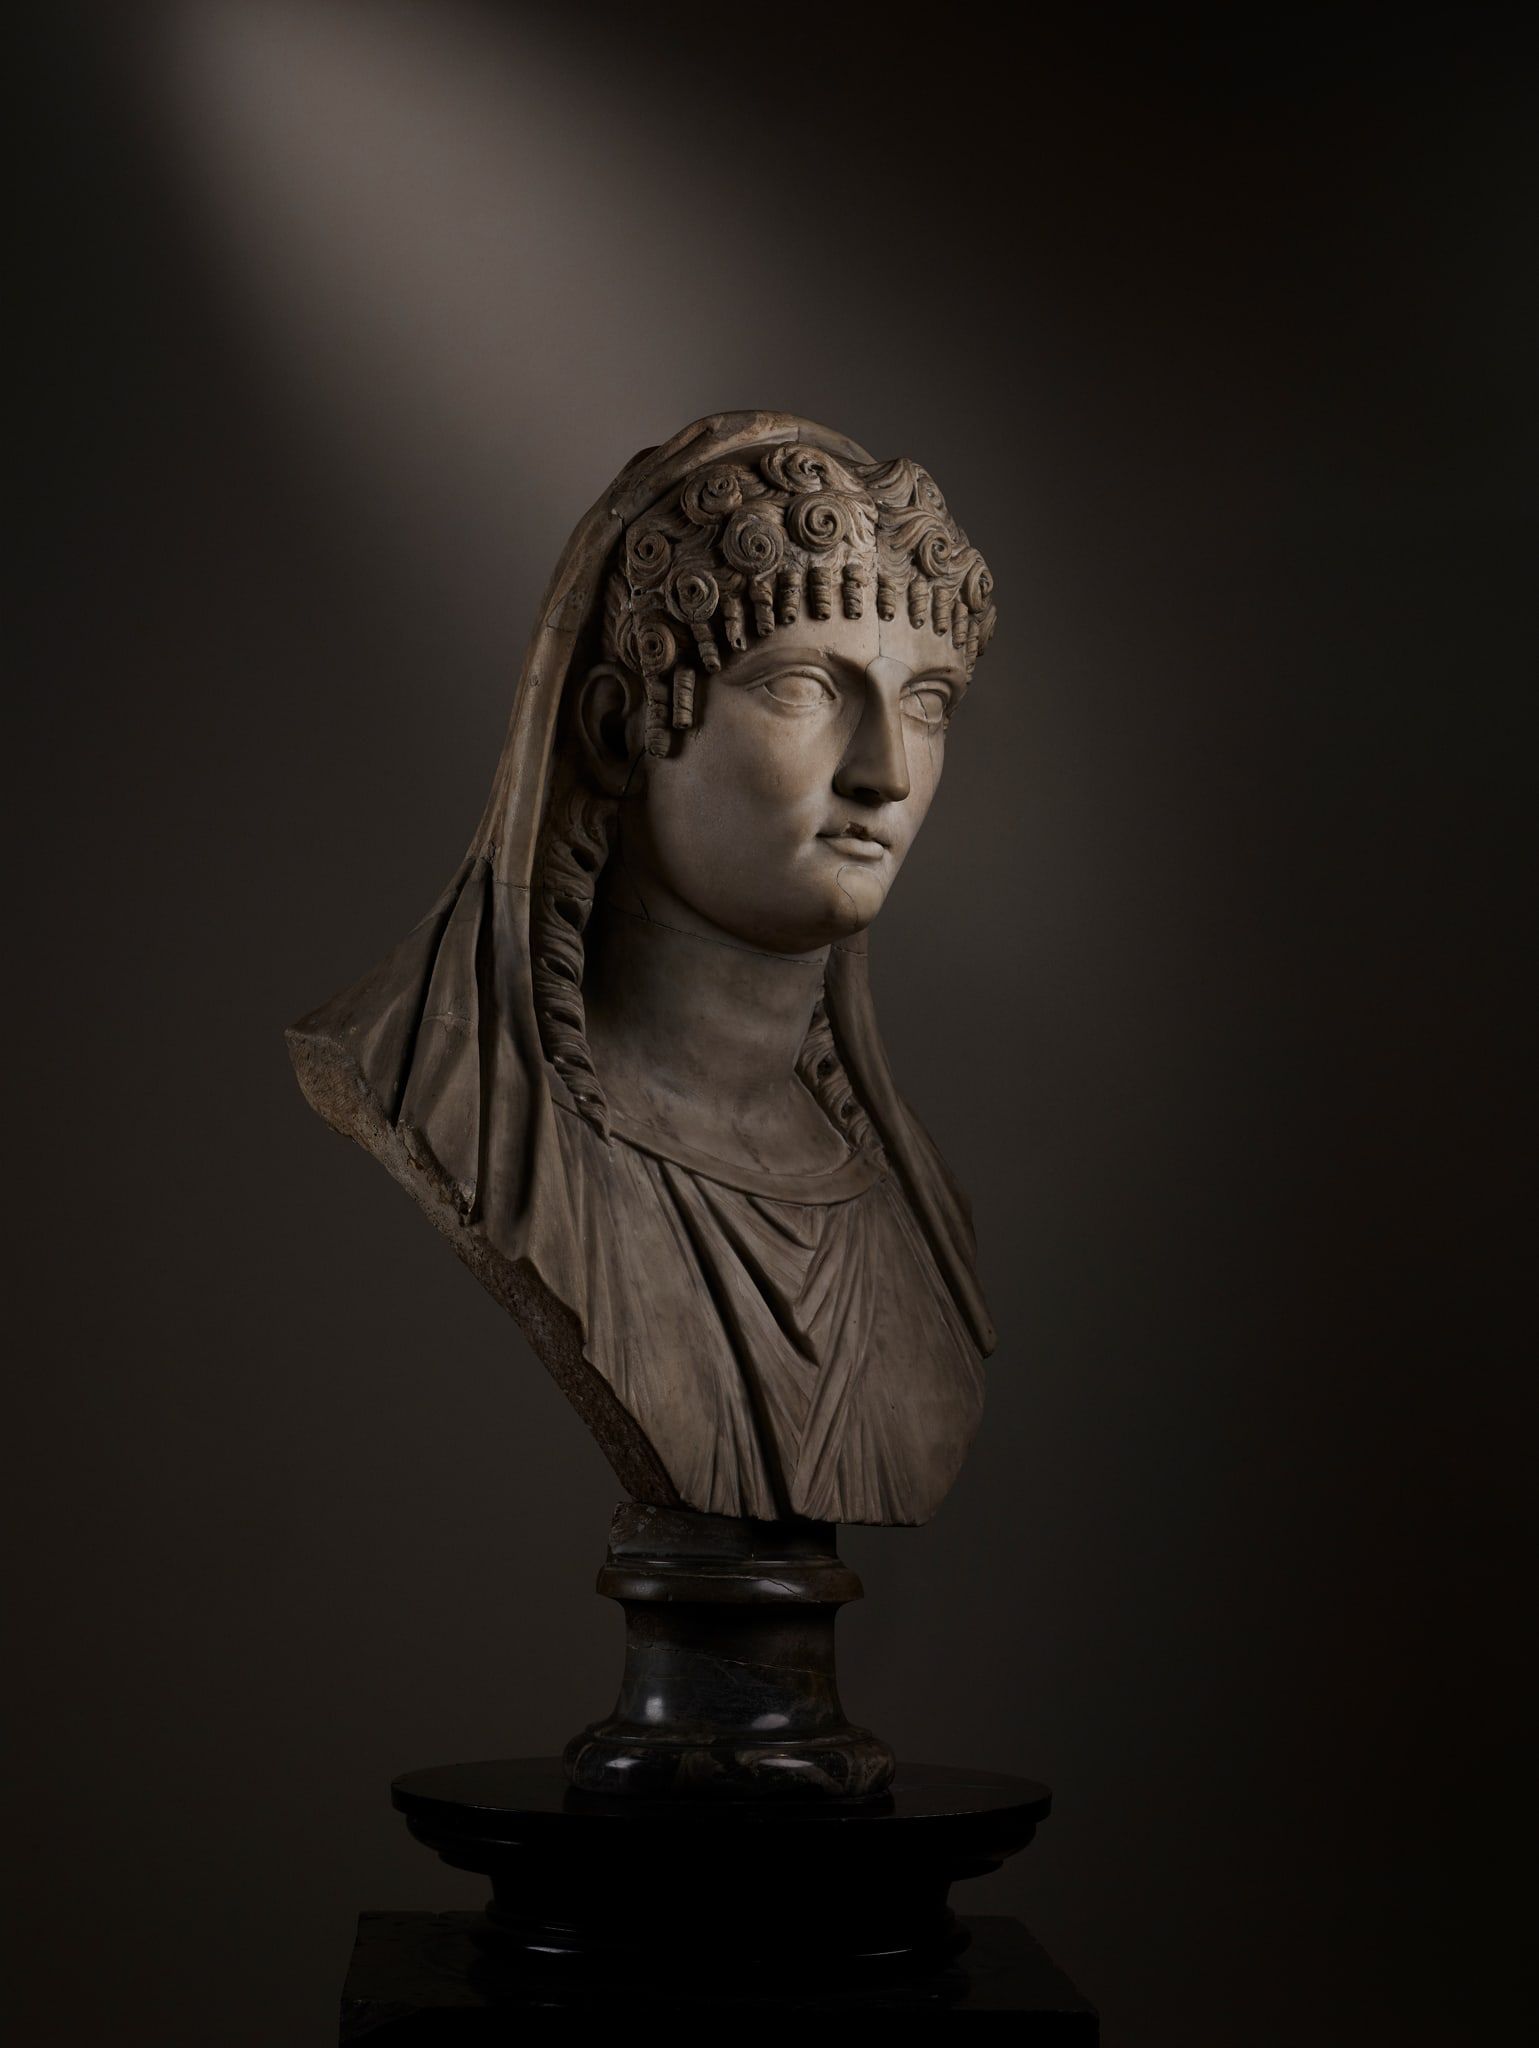 Roman Trajanic marble bust of Pompeia Plotina, one of three larger-than-life busts of women that sold for a combined £1.26 million ($1.59 million) at Lyon & Turnbull.